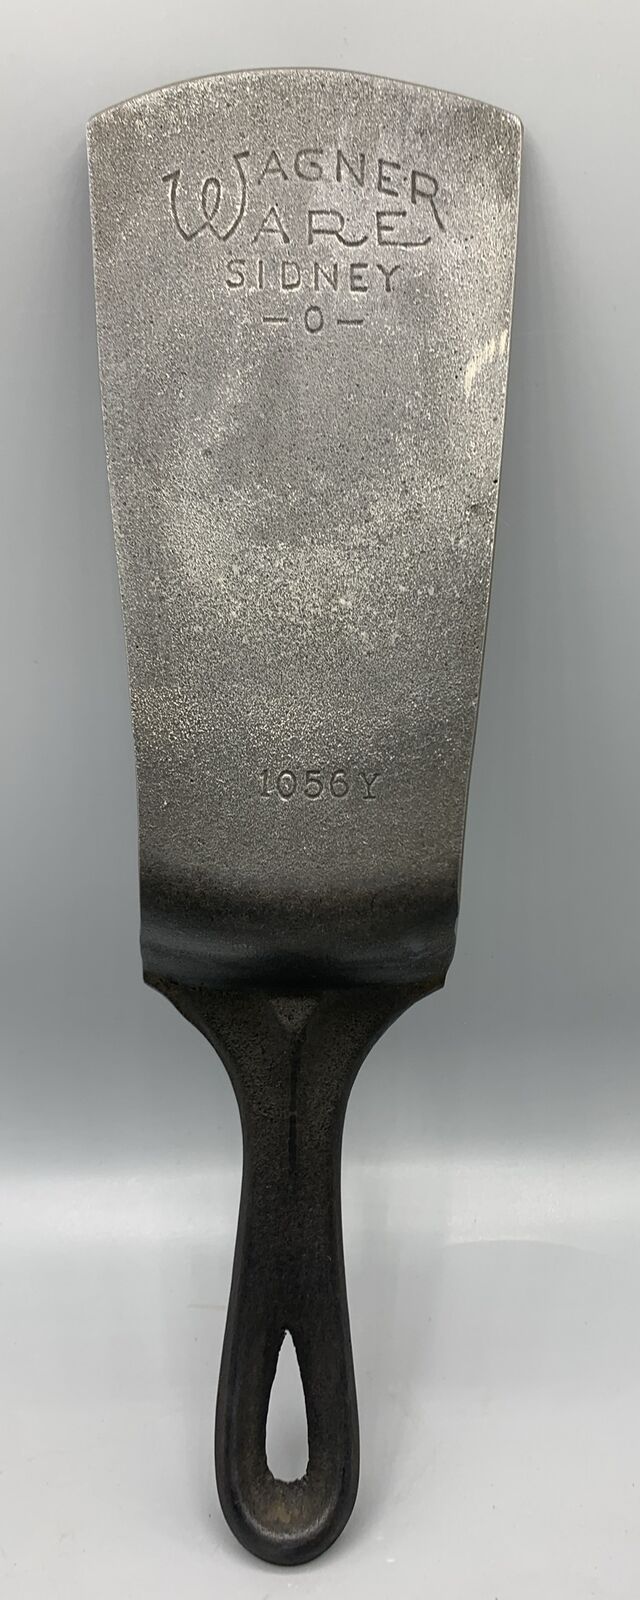 Vintage Wagner Ware Sidney O Cast Iron Spatula Made From Wagner #6 1056 Skillet